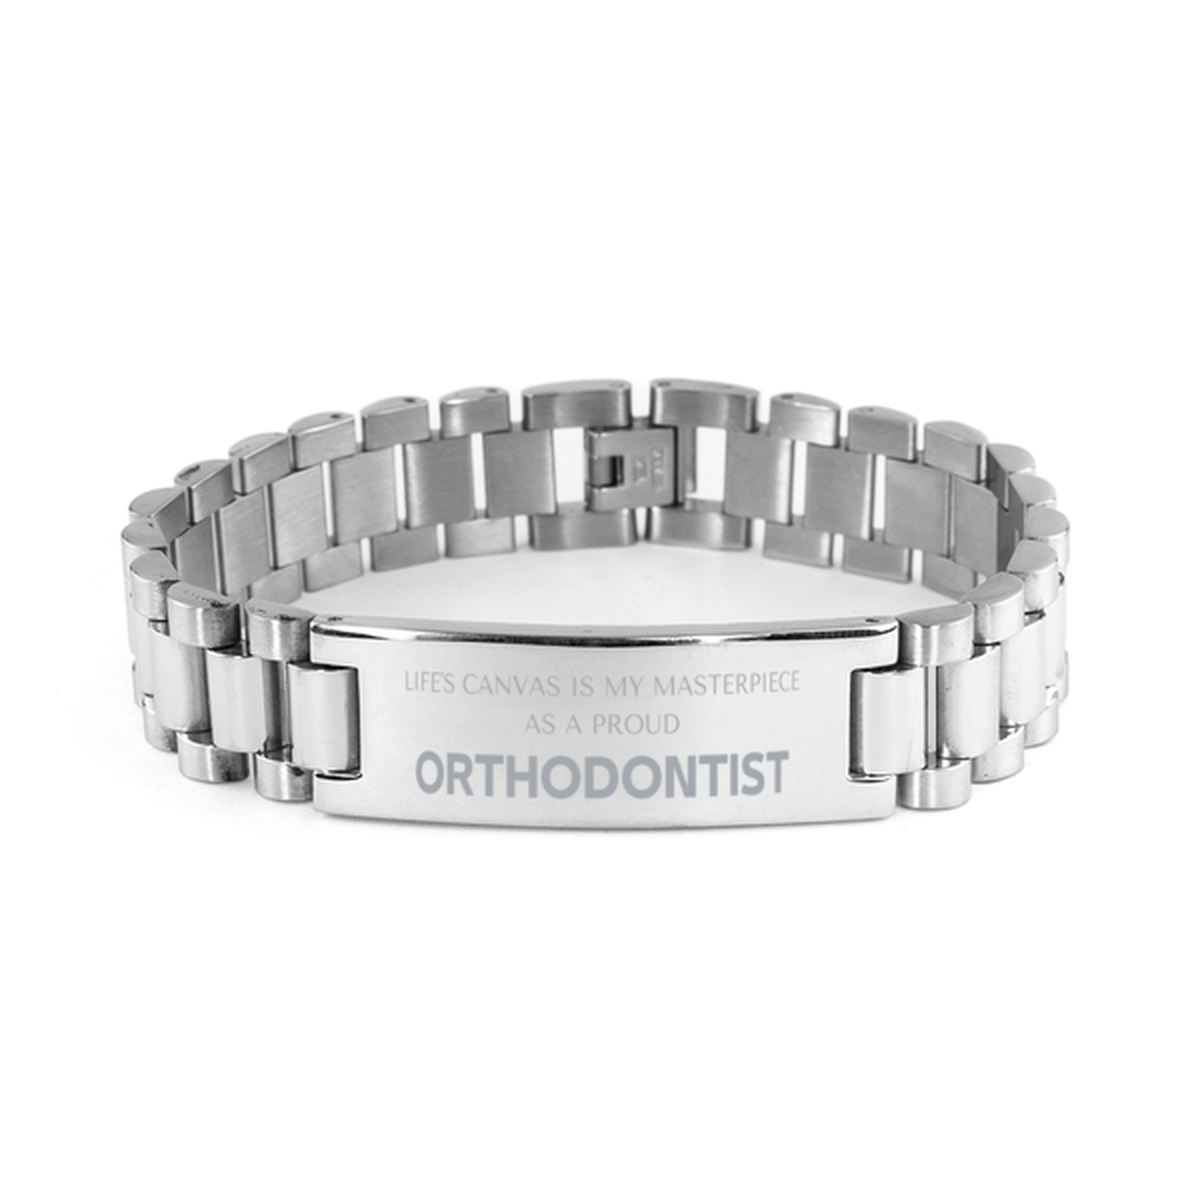 Proud Orthodontist Gifts, Life's canvas is my masterpiece, Epic Birthday Christmas Unique Ladder Stainless Steel Bracelet For Orthodontist, Coworkers, Men, Women, Friends